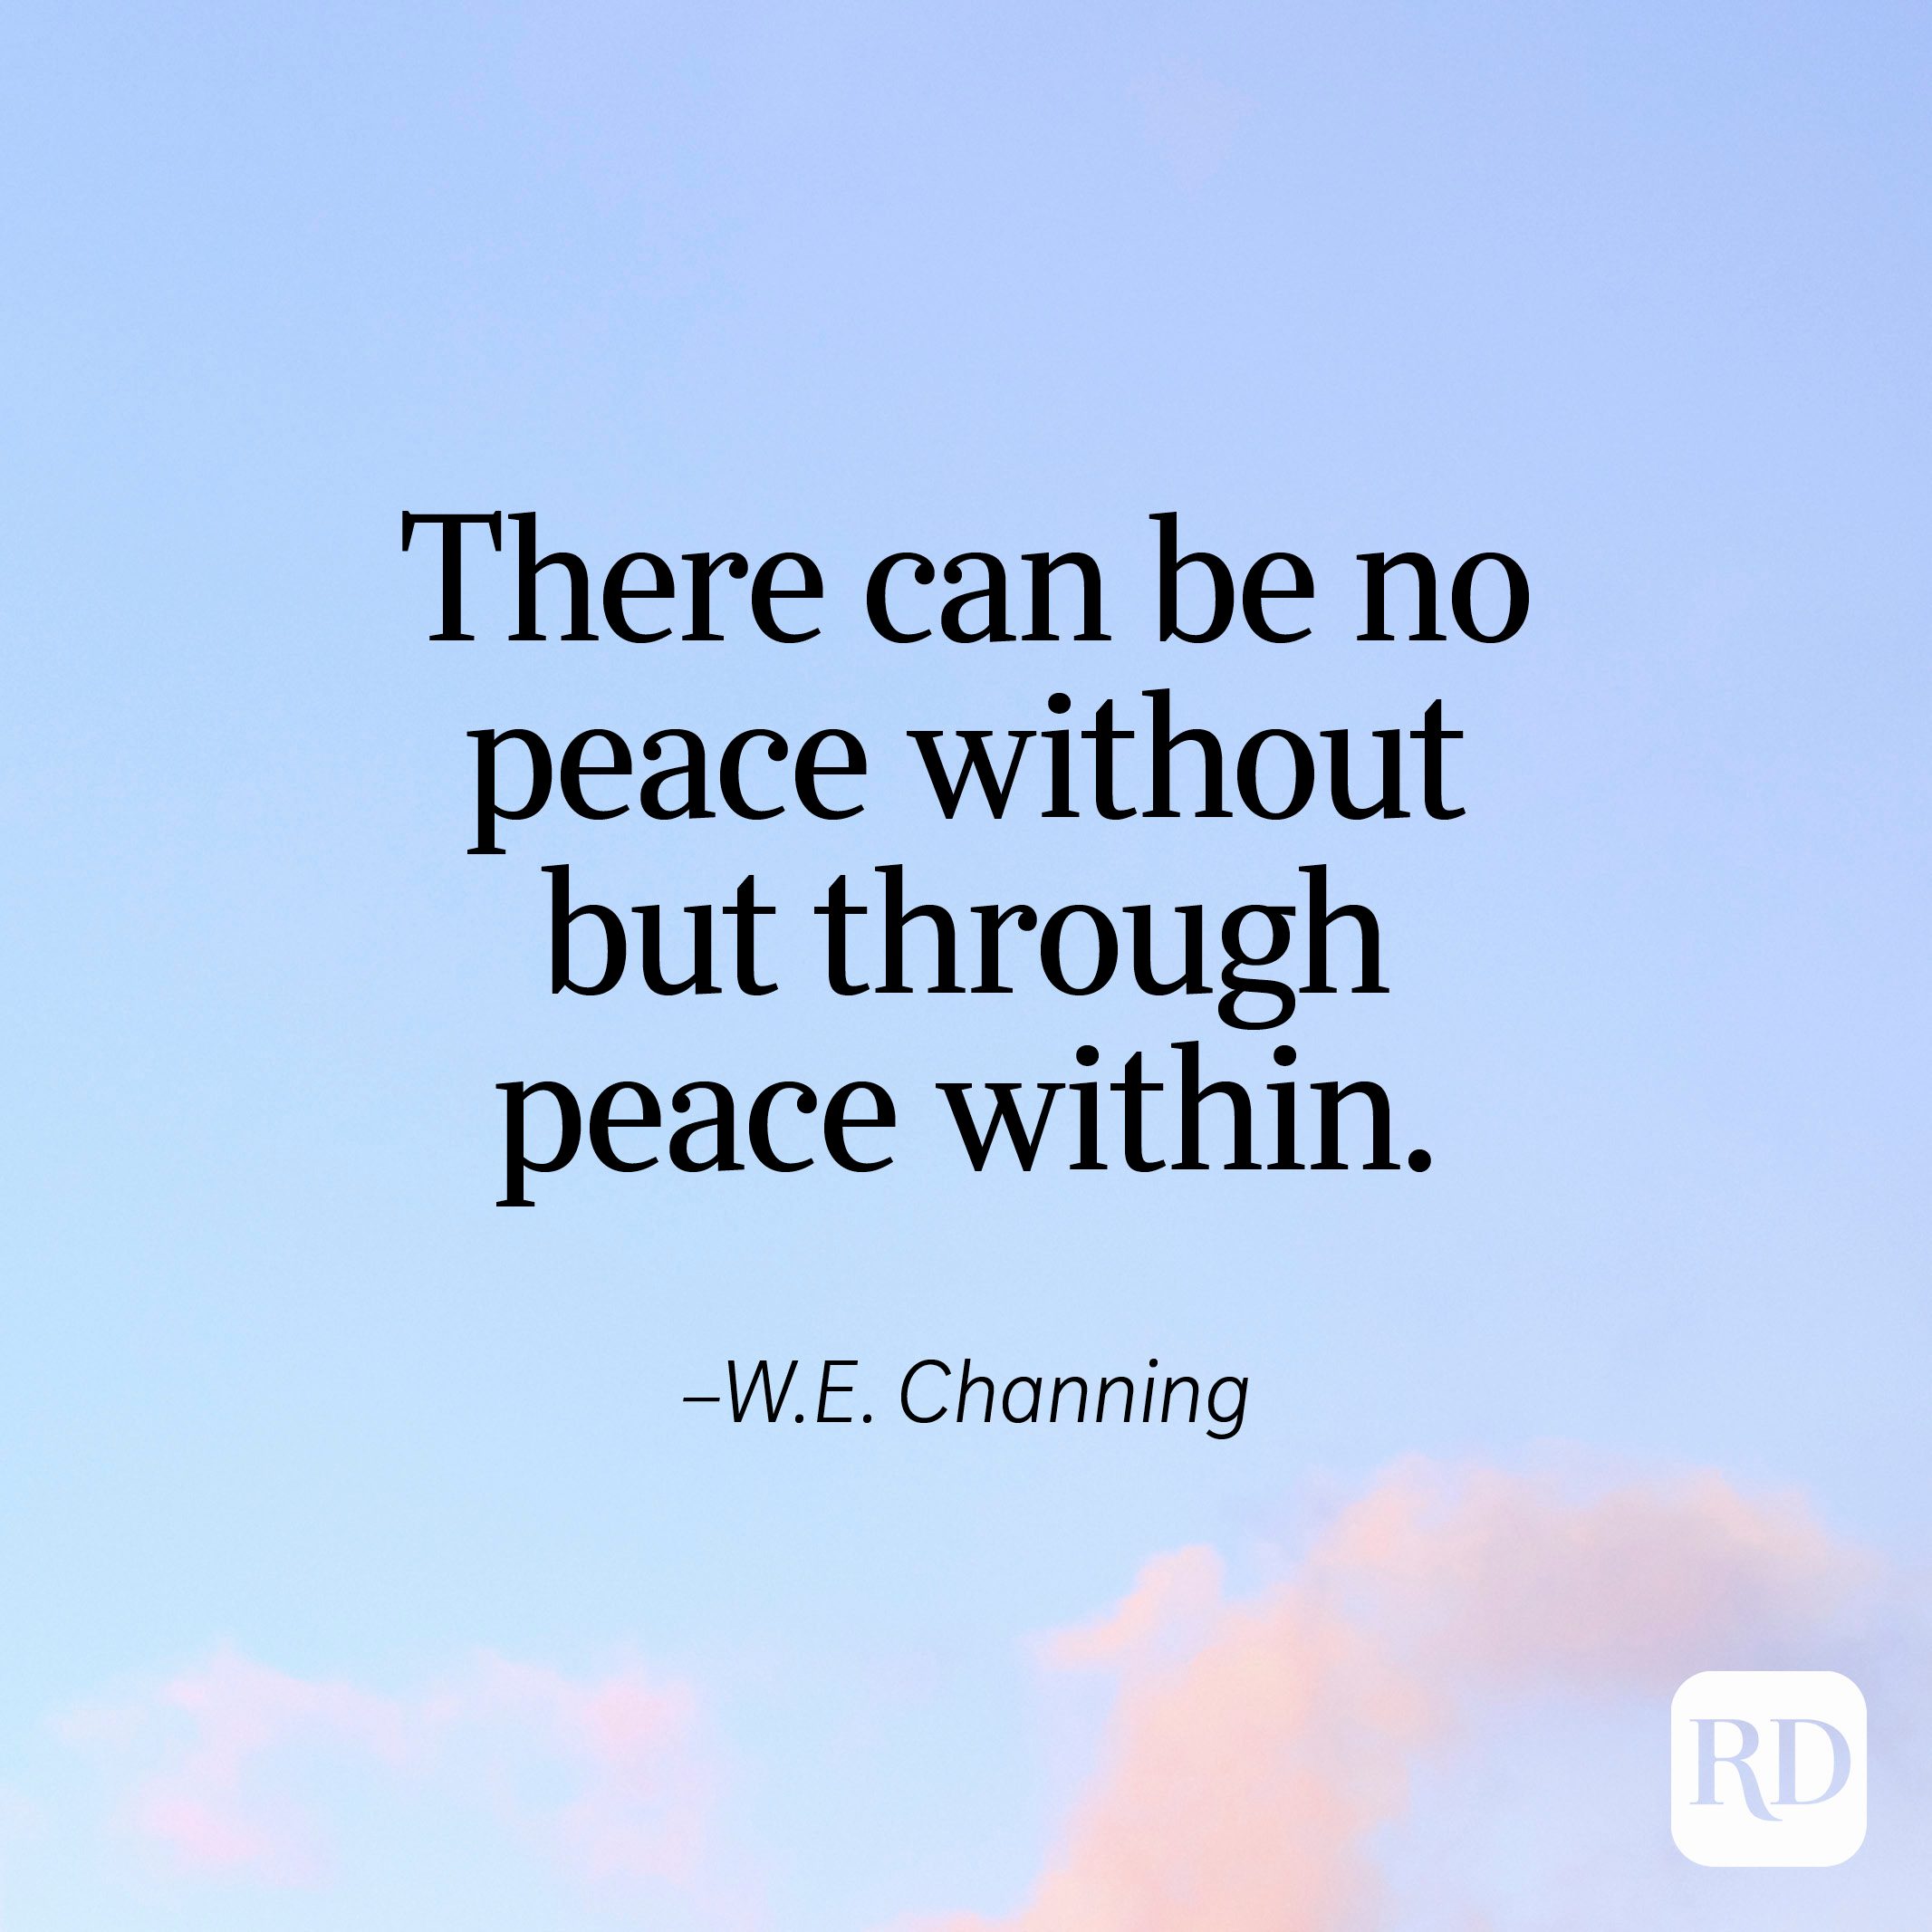 "There can be no peace without but through peace within." —W.E. Channing